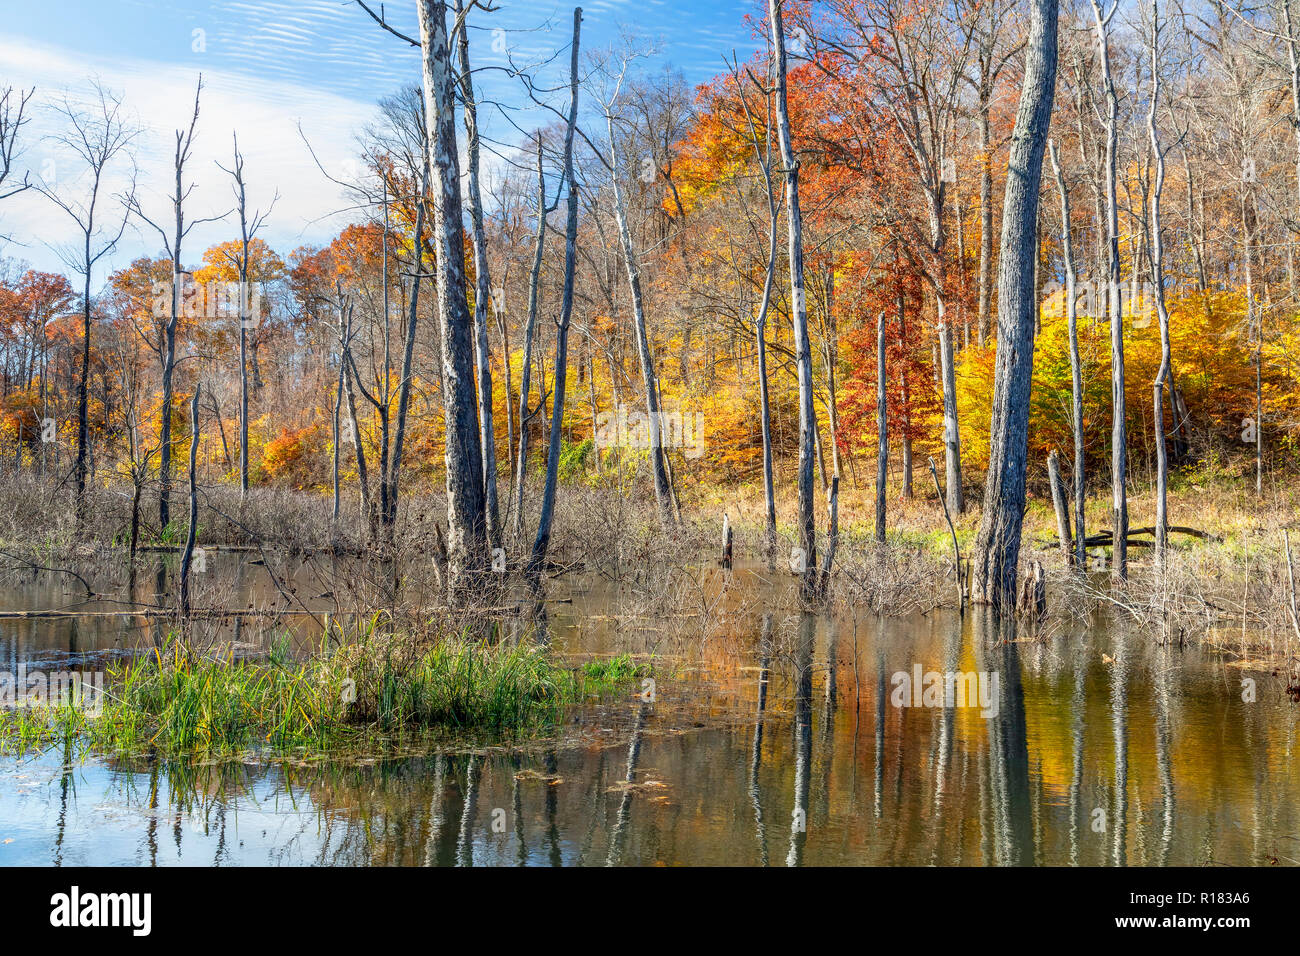 Colorful fall foliage surrounds a swampy area in Indiana. Stock Photo